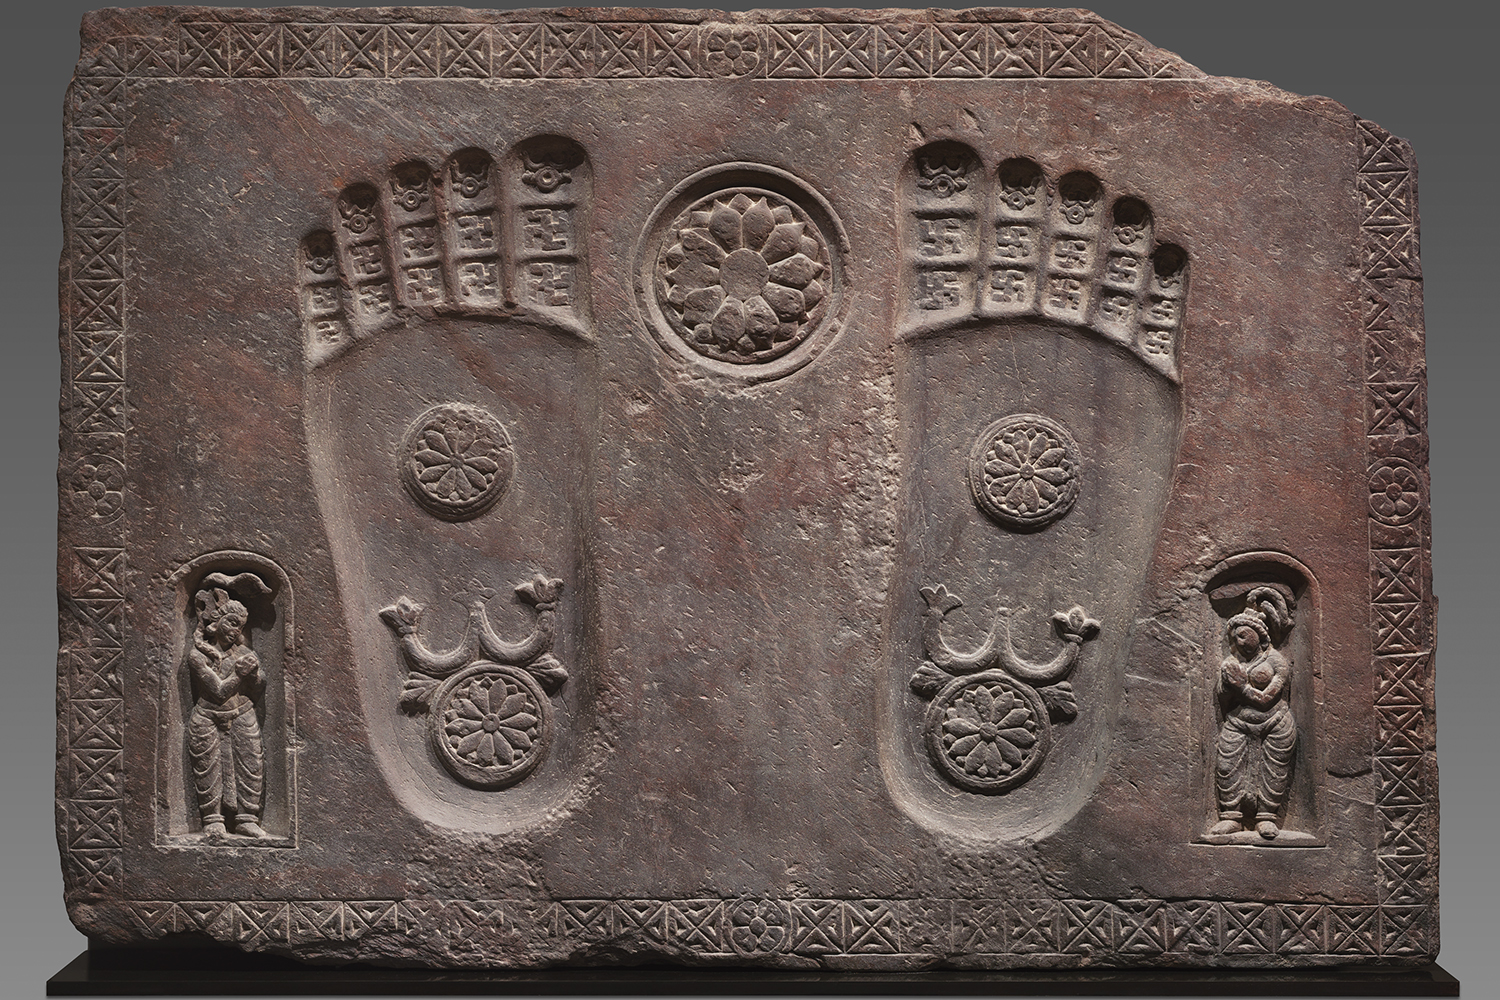 A schist block depicting two footprints with lotuses engraved on them, accompanied by two figures.